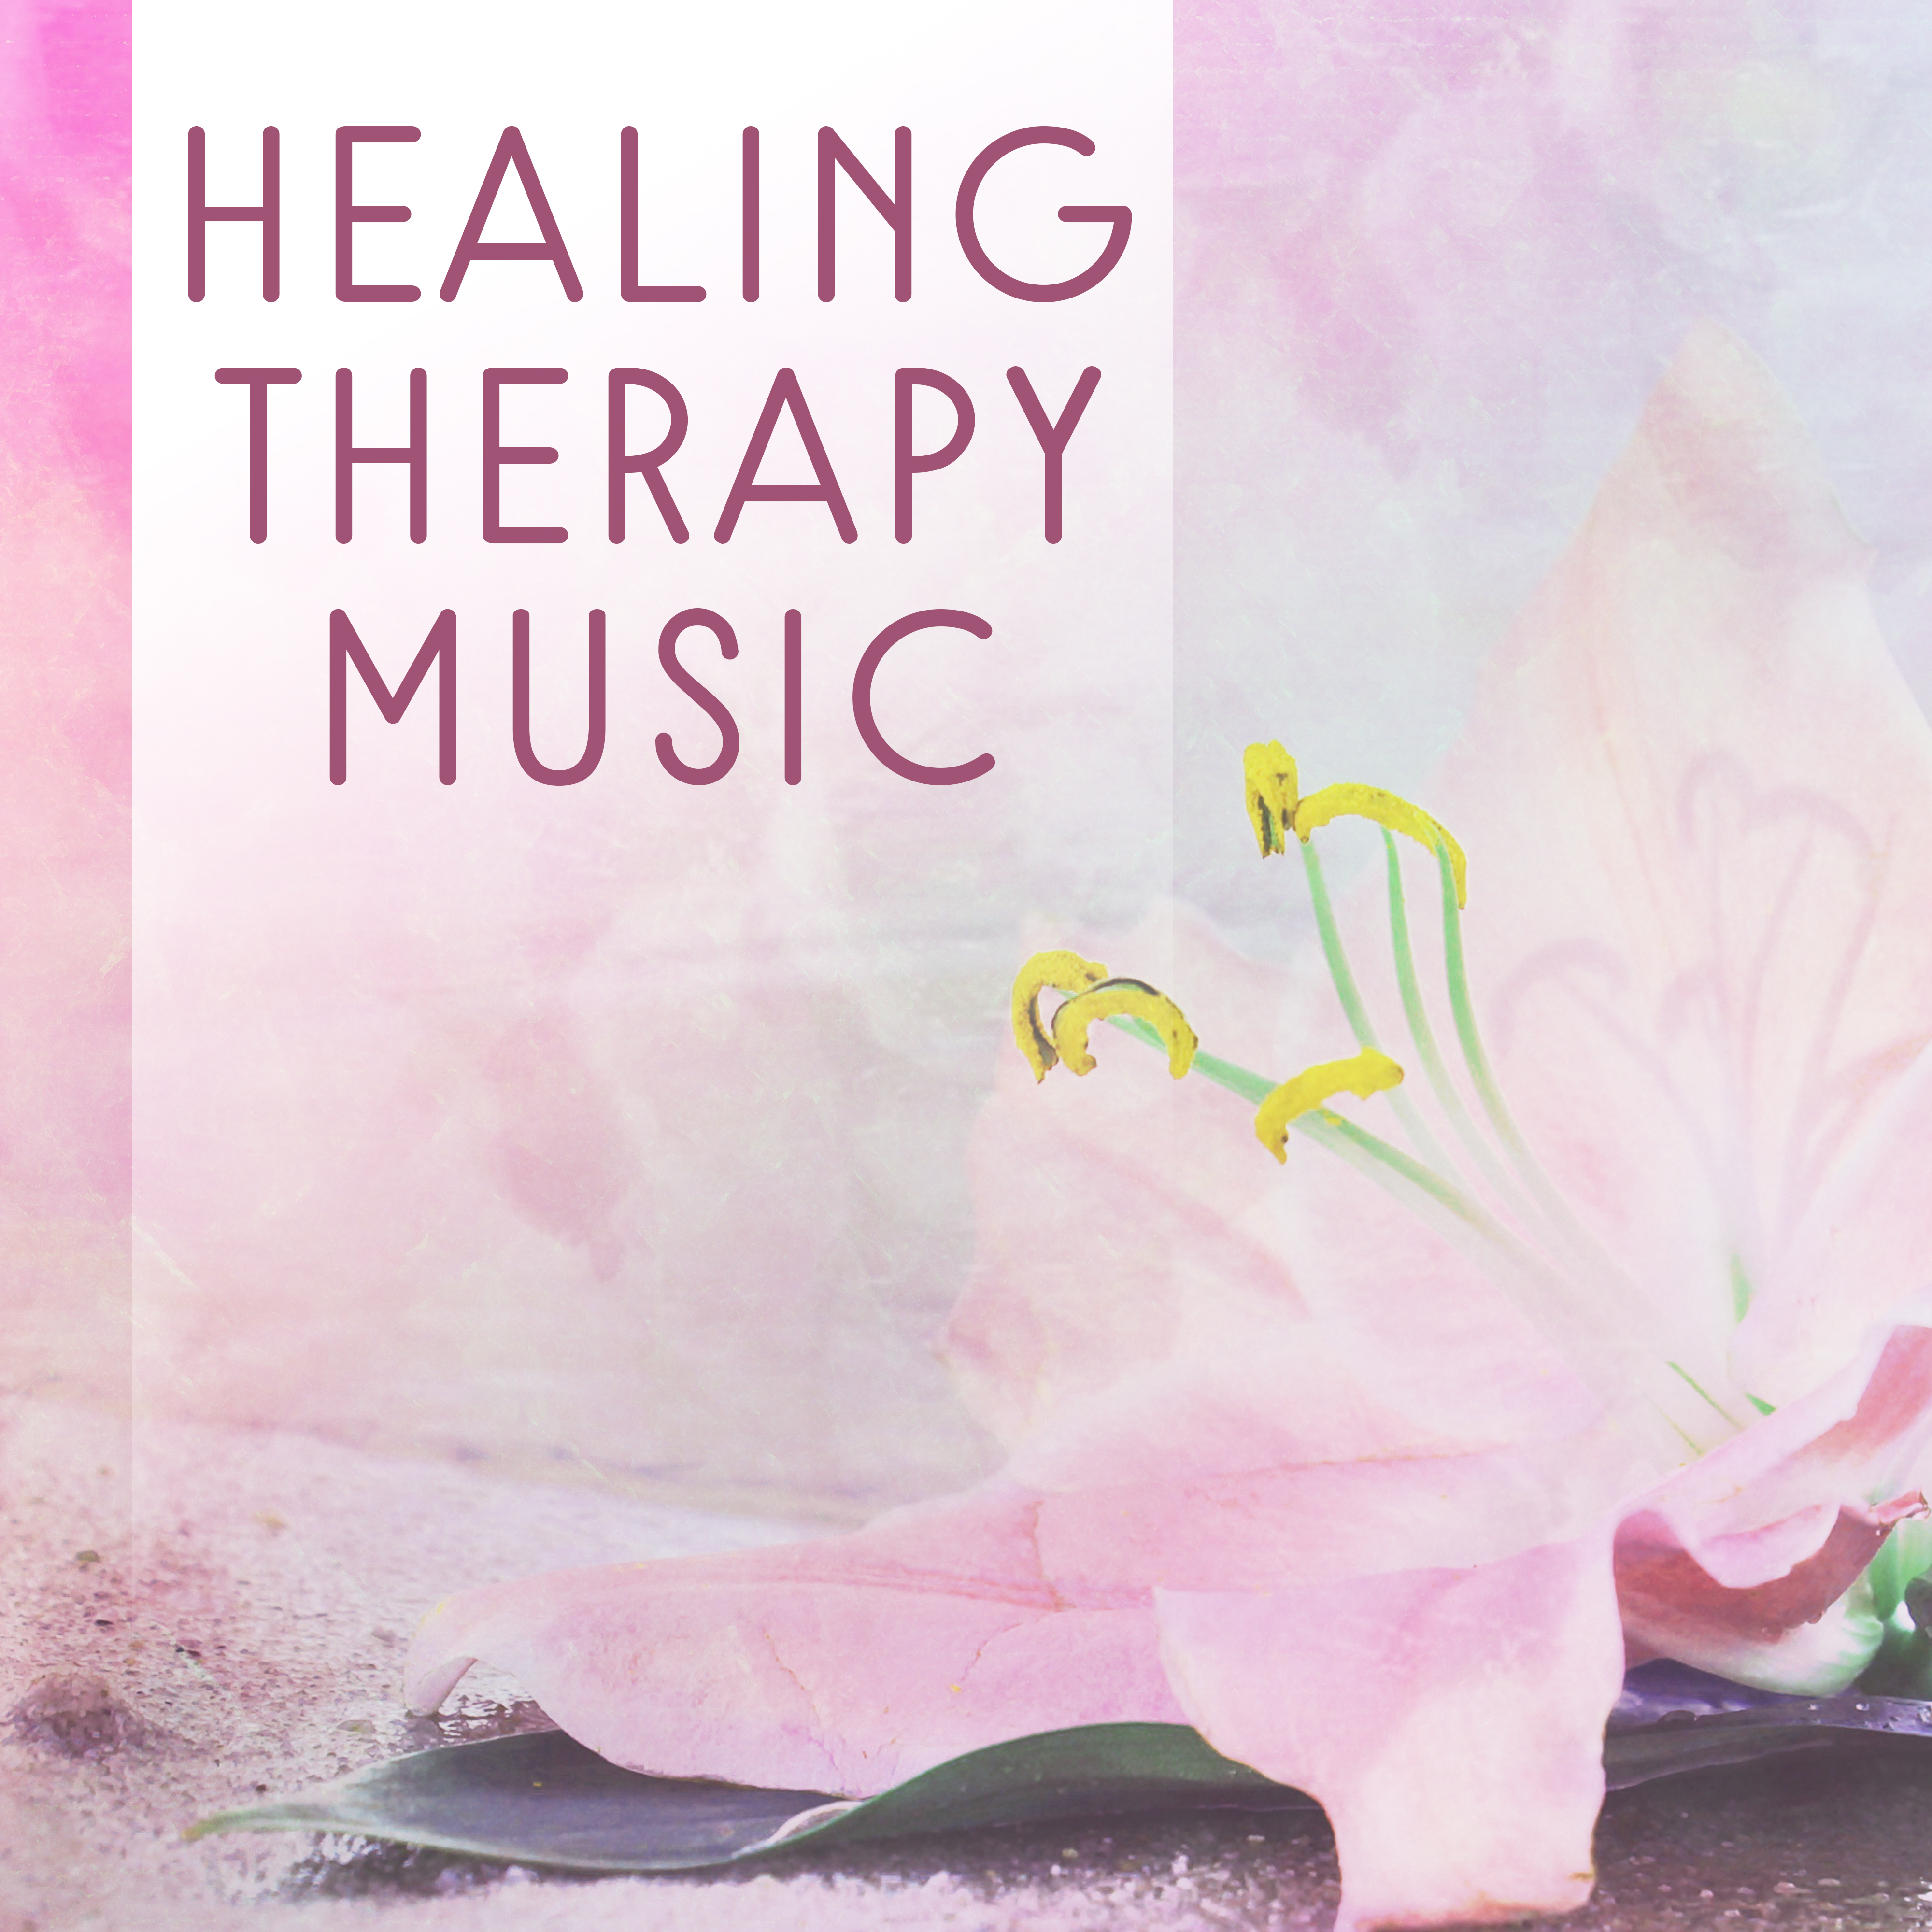 Healing Therapy Music  Spa Dreams, Relaxation Sounds for Wellness, Pure Massage, Nature Sounds, Stress Free, Spa Music, Relief